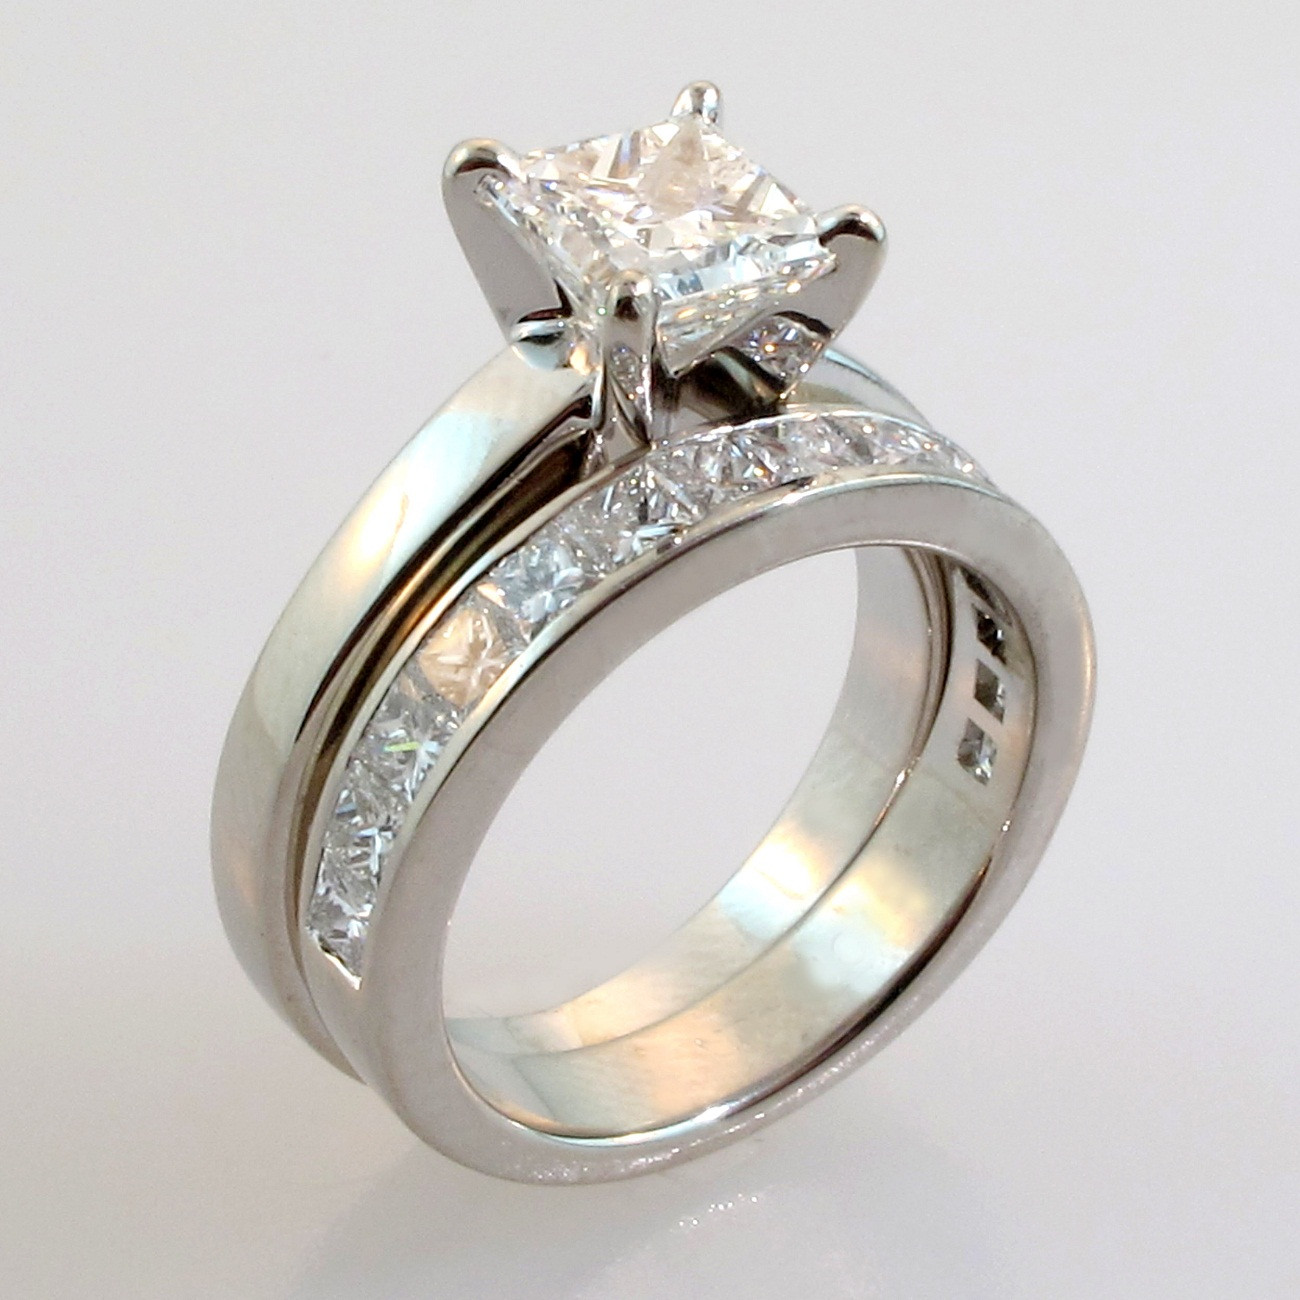 Engagement Rings Wedding Rings
 Engagement And Wedding Ring Sets We Need Fun